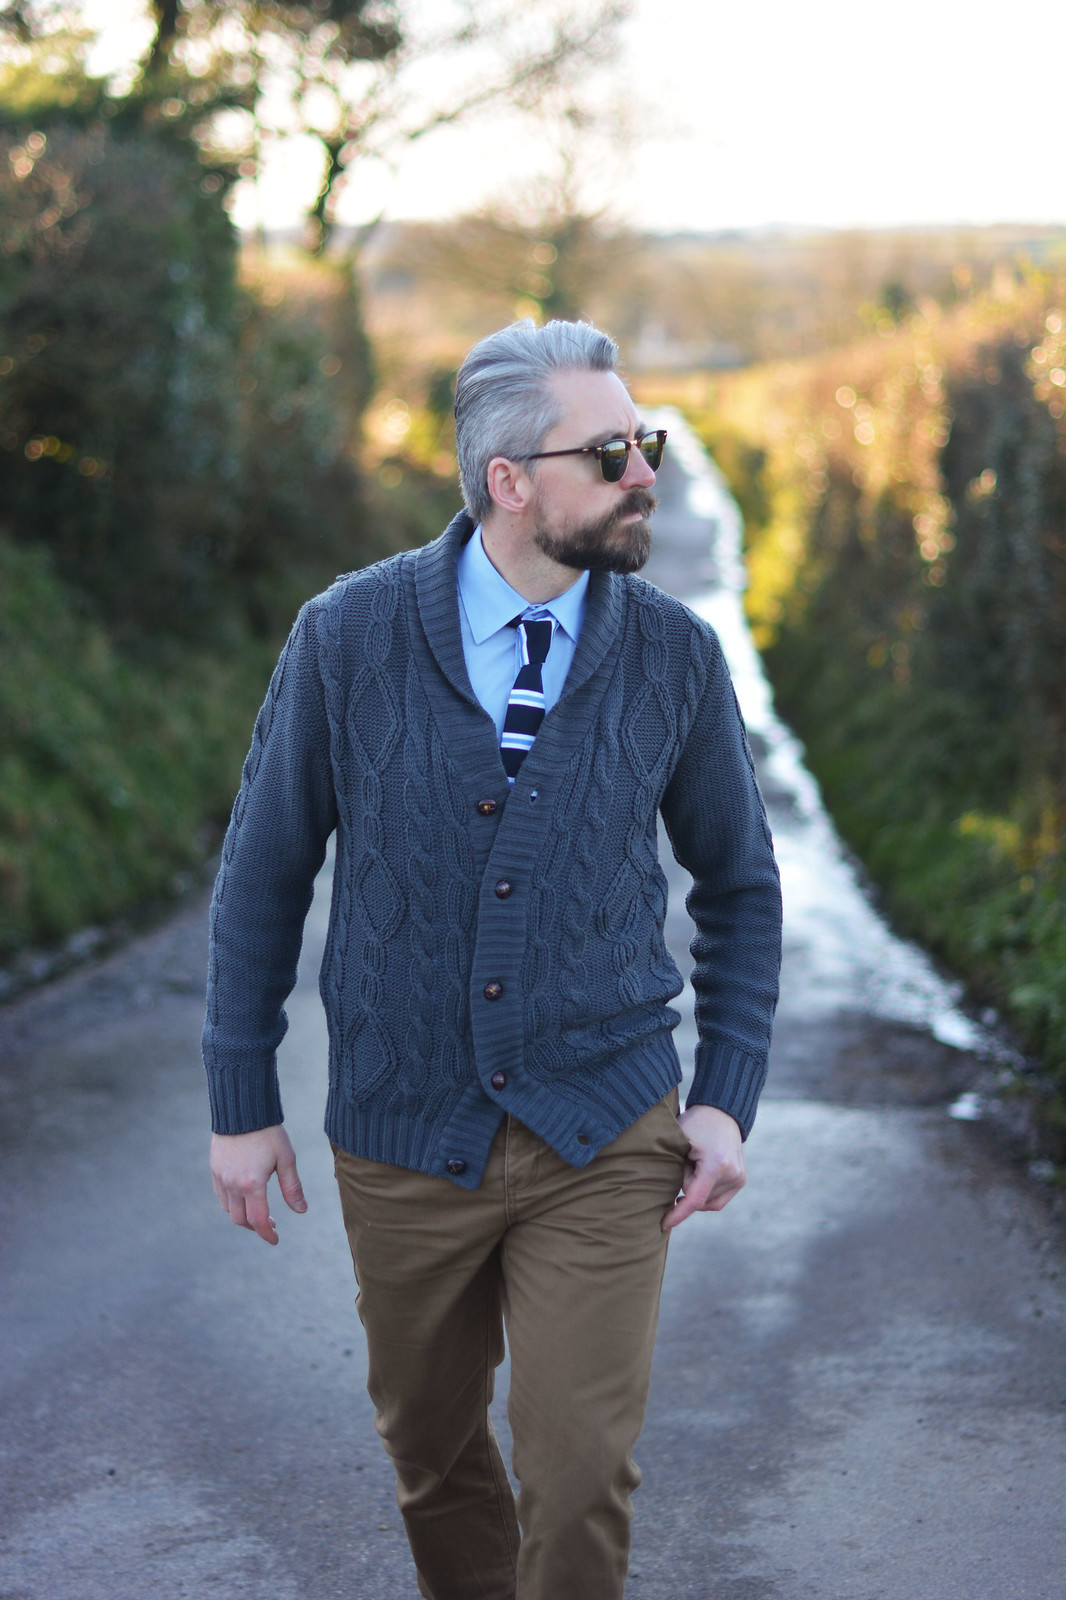 Smart casual menswear: Cable knit cardigan \ shirt and striped tie \ camel chinos \ canvas lace-up shoes \ RayBan Clubmasters | Silver Londoner, over 40 menswear